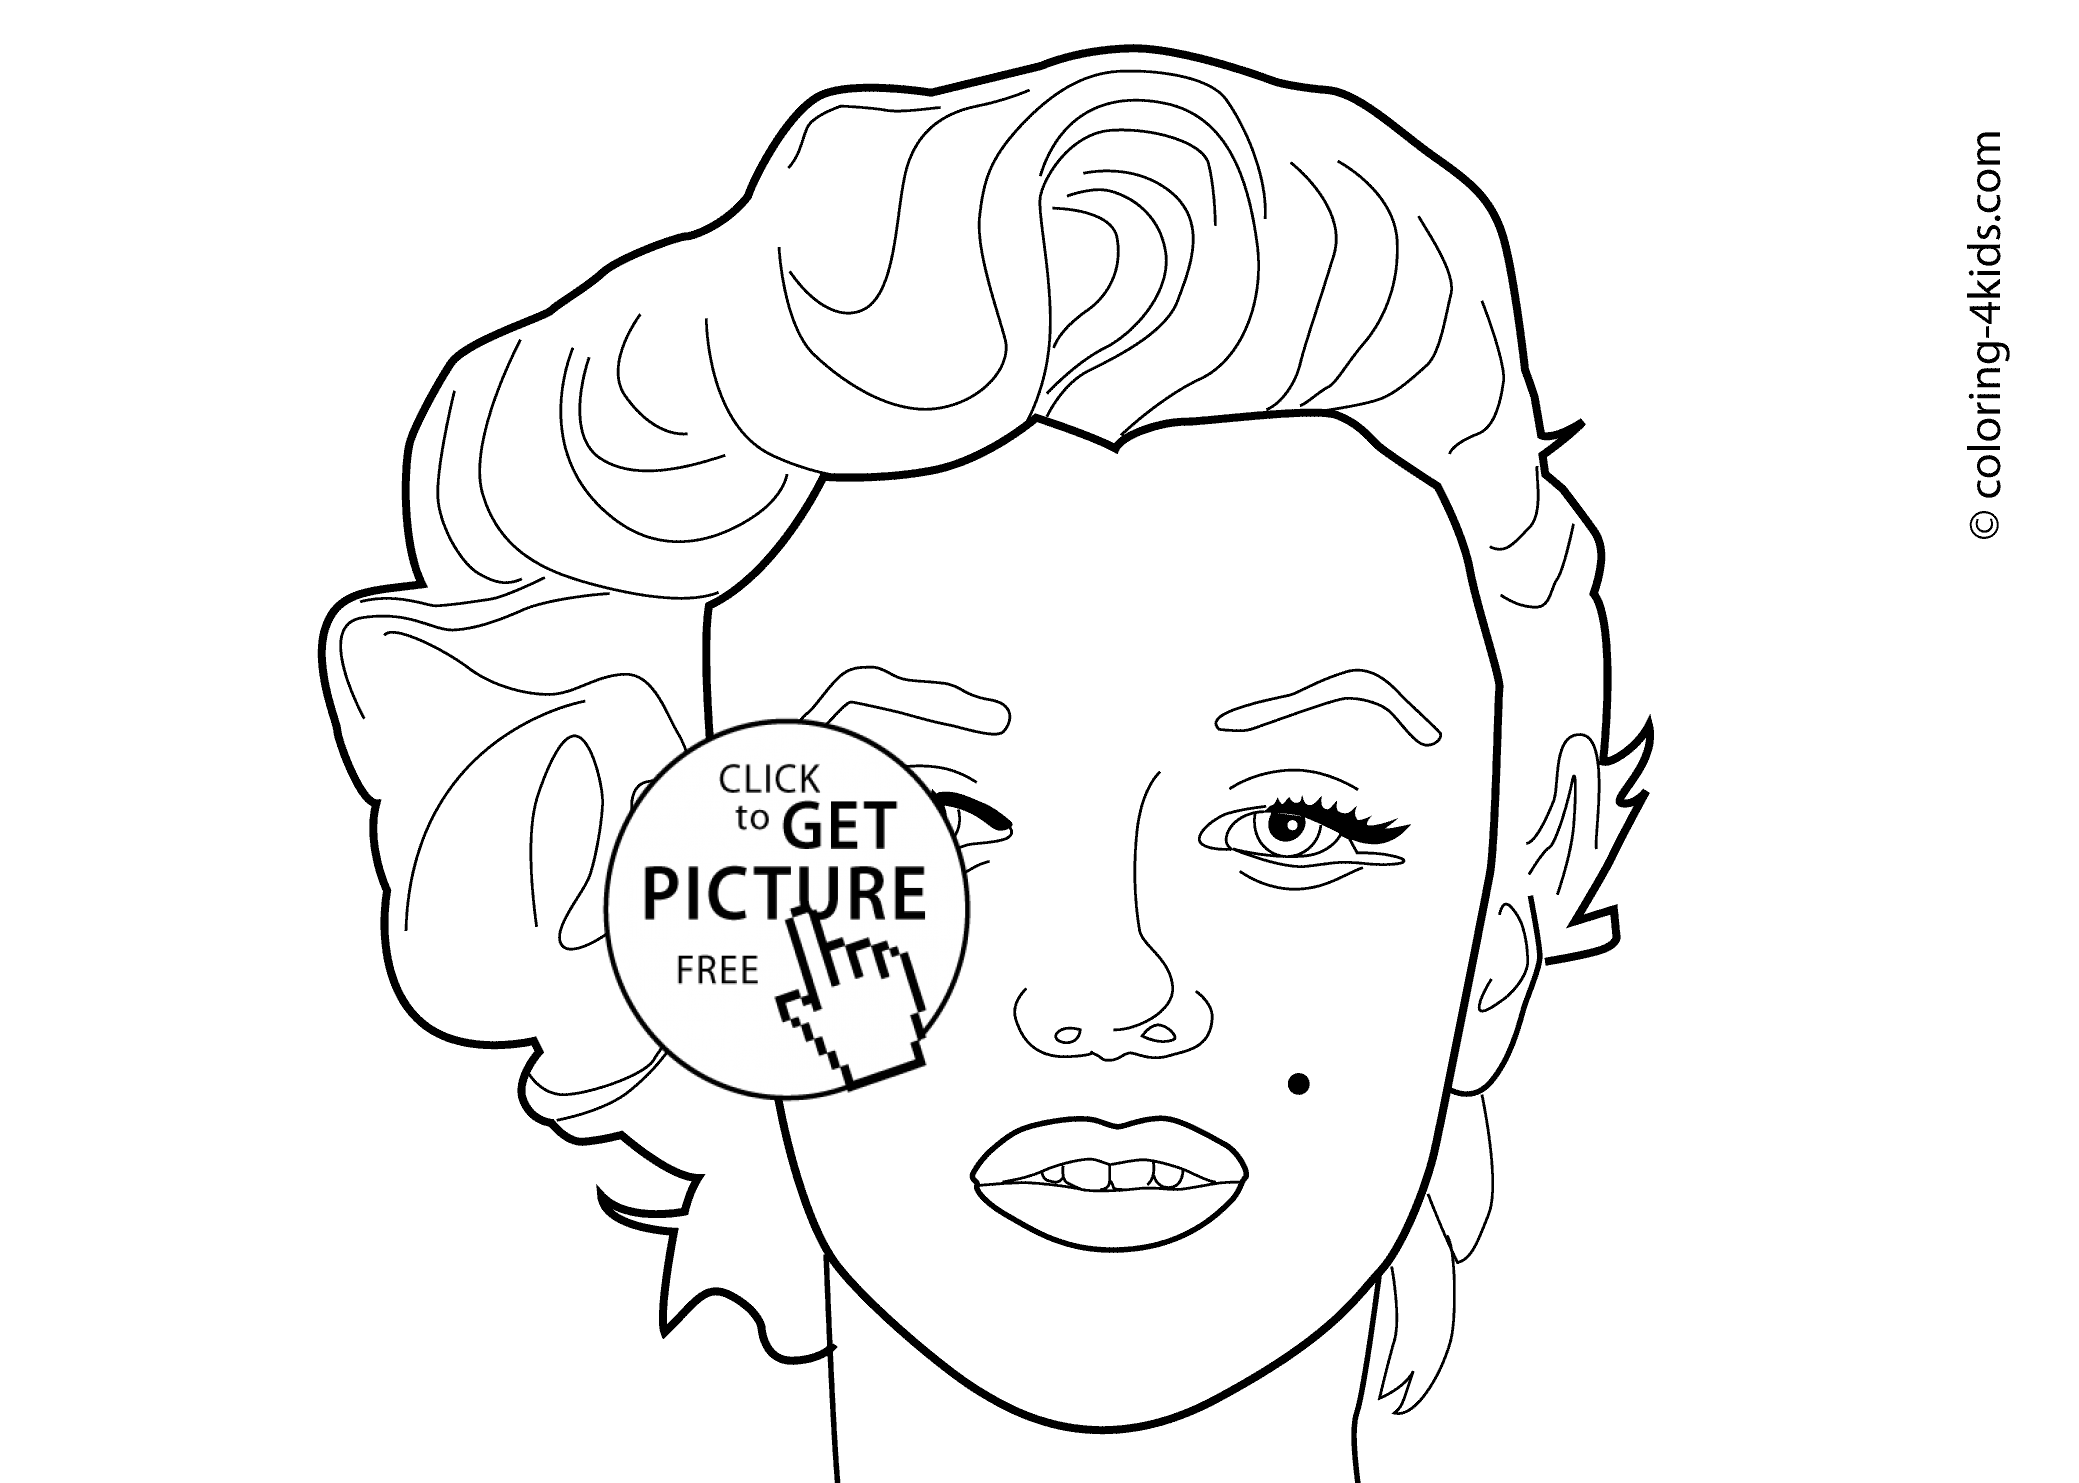 Marilyn Monroe coloring pages for kids, printable free coloring ...